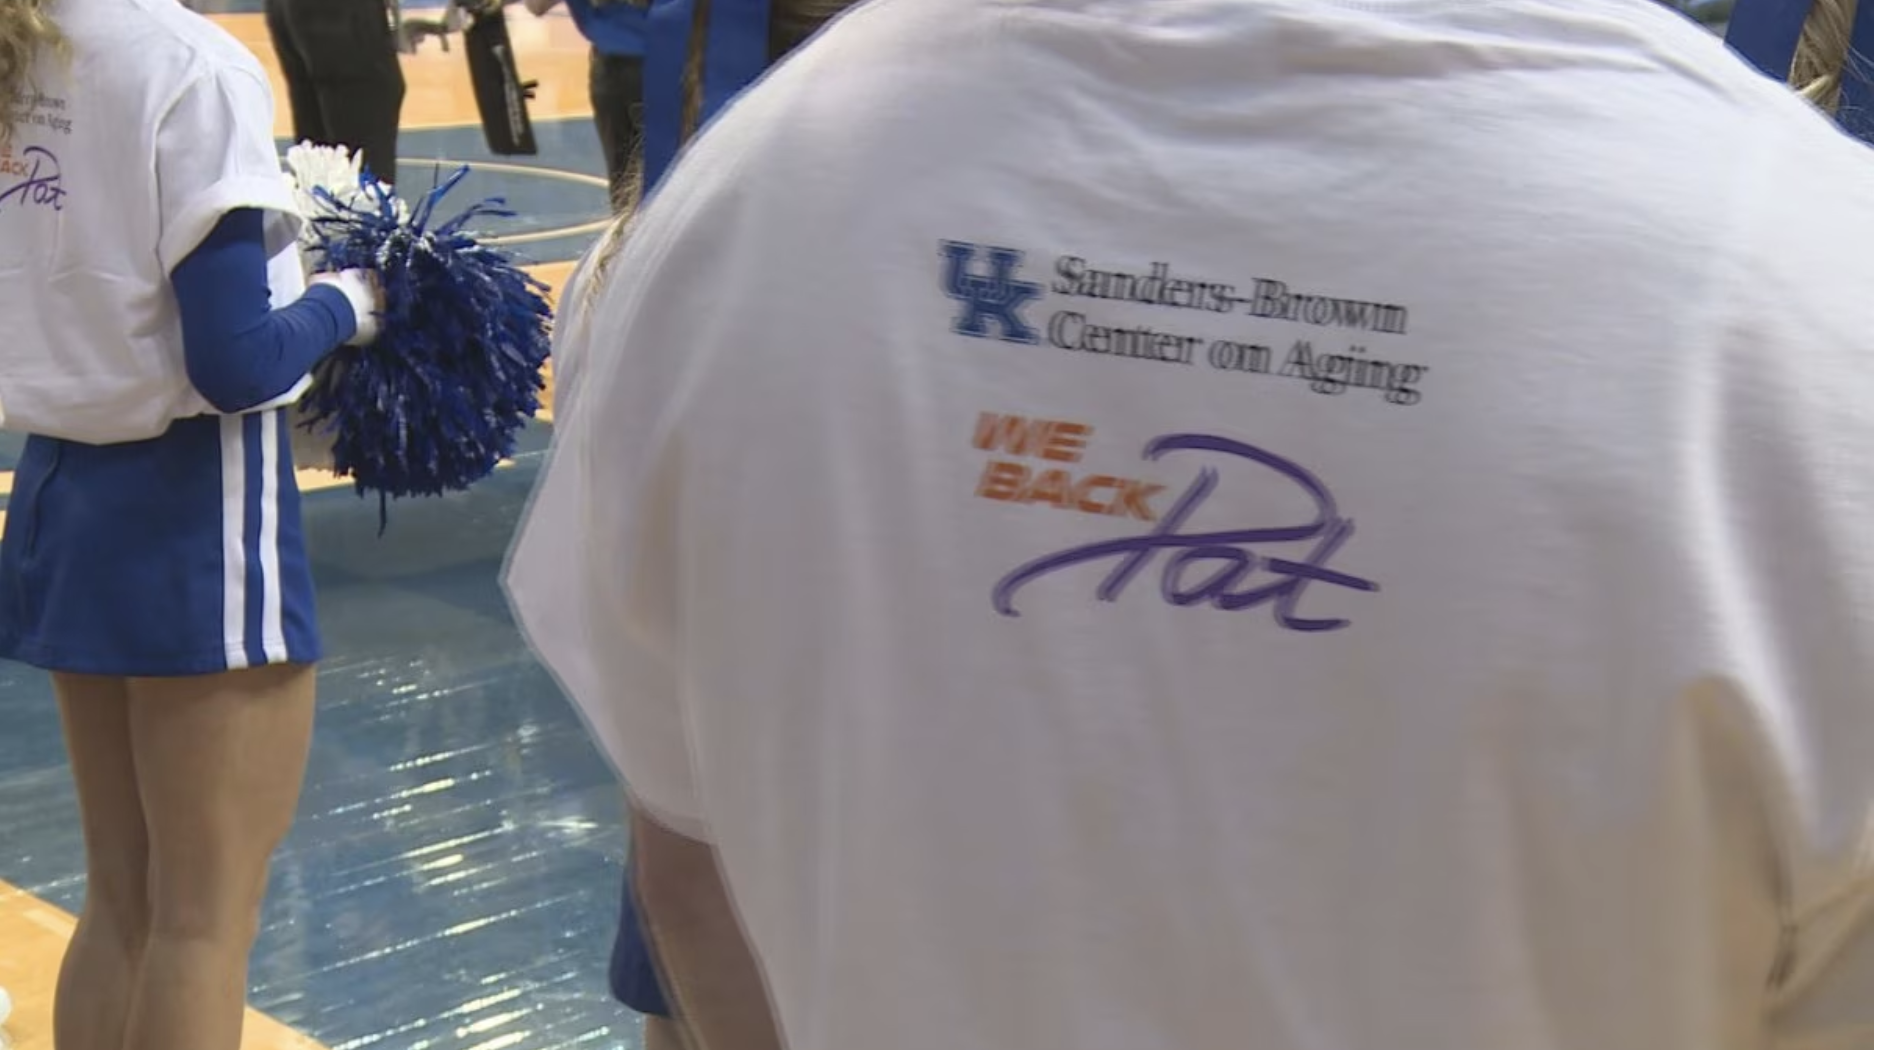 The back of a t-shirt that reads: Sanders Brown Center on Aging, We Back Pat